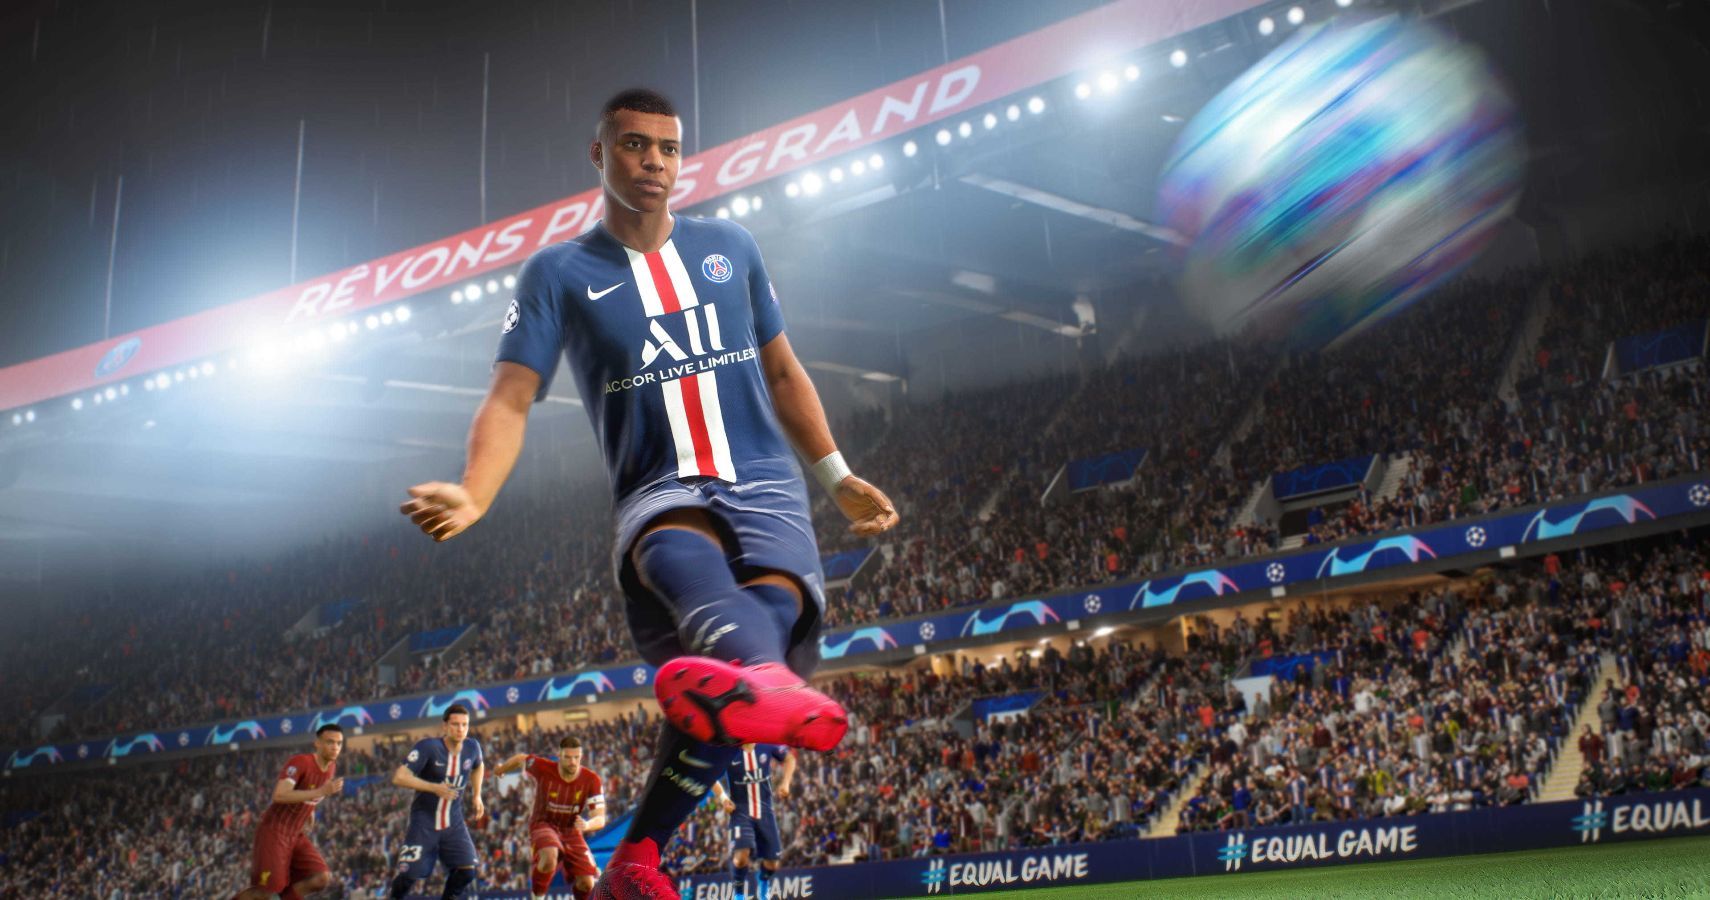 mbappe in FIFA 21